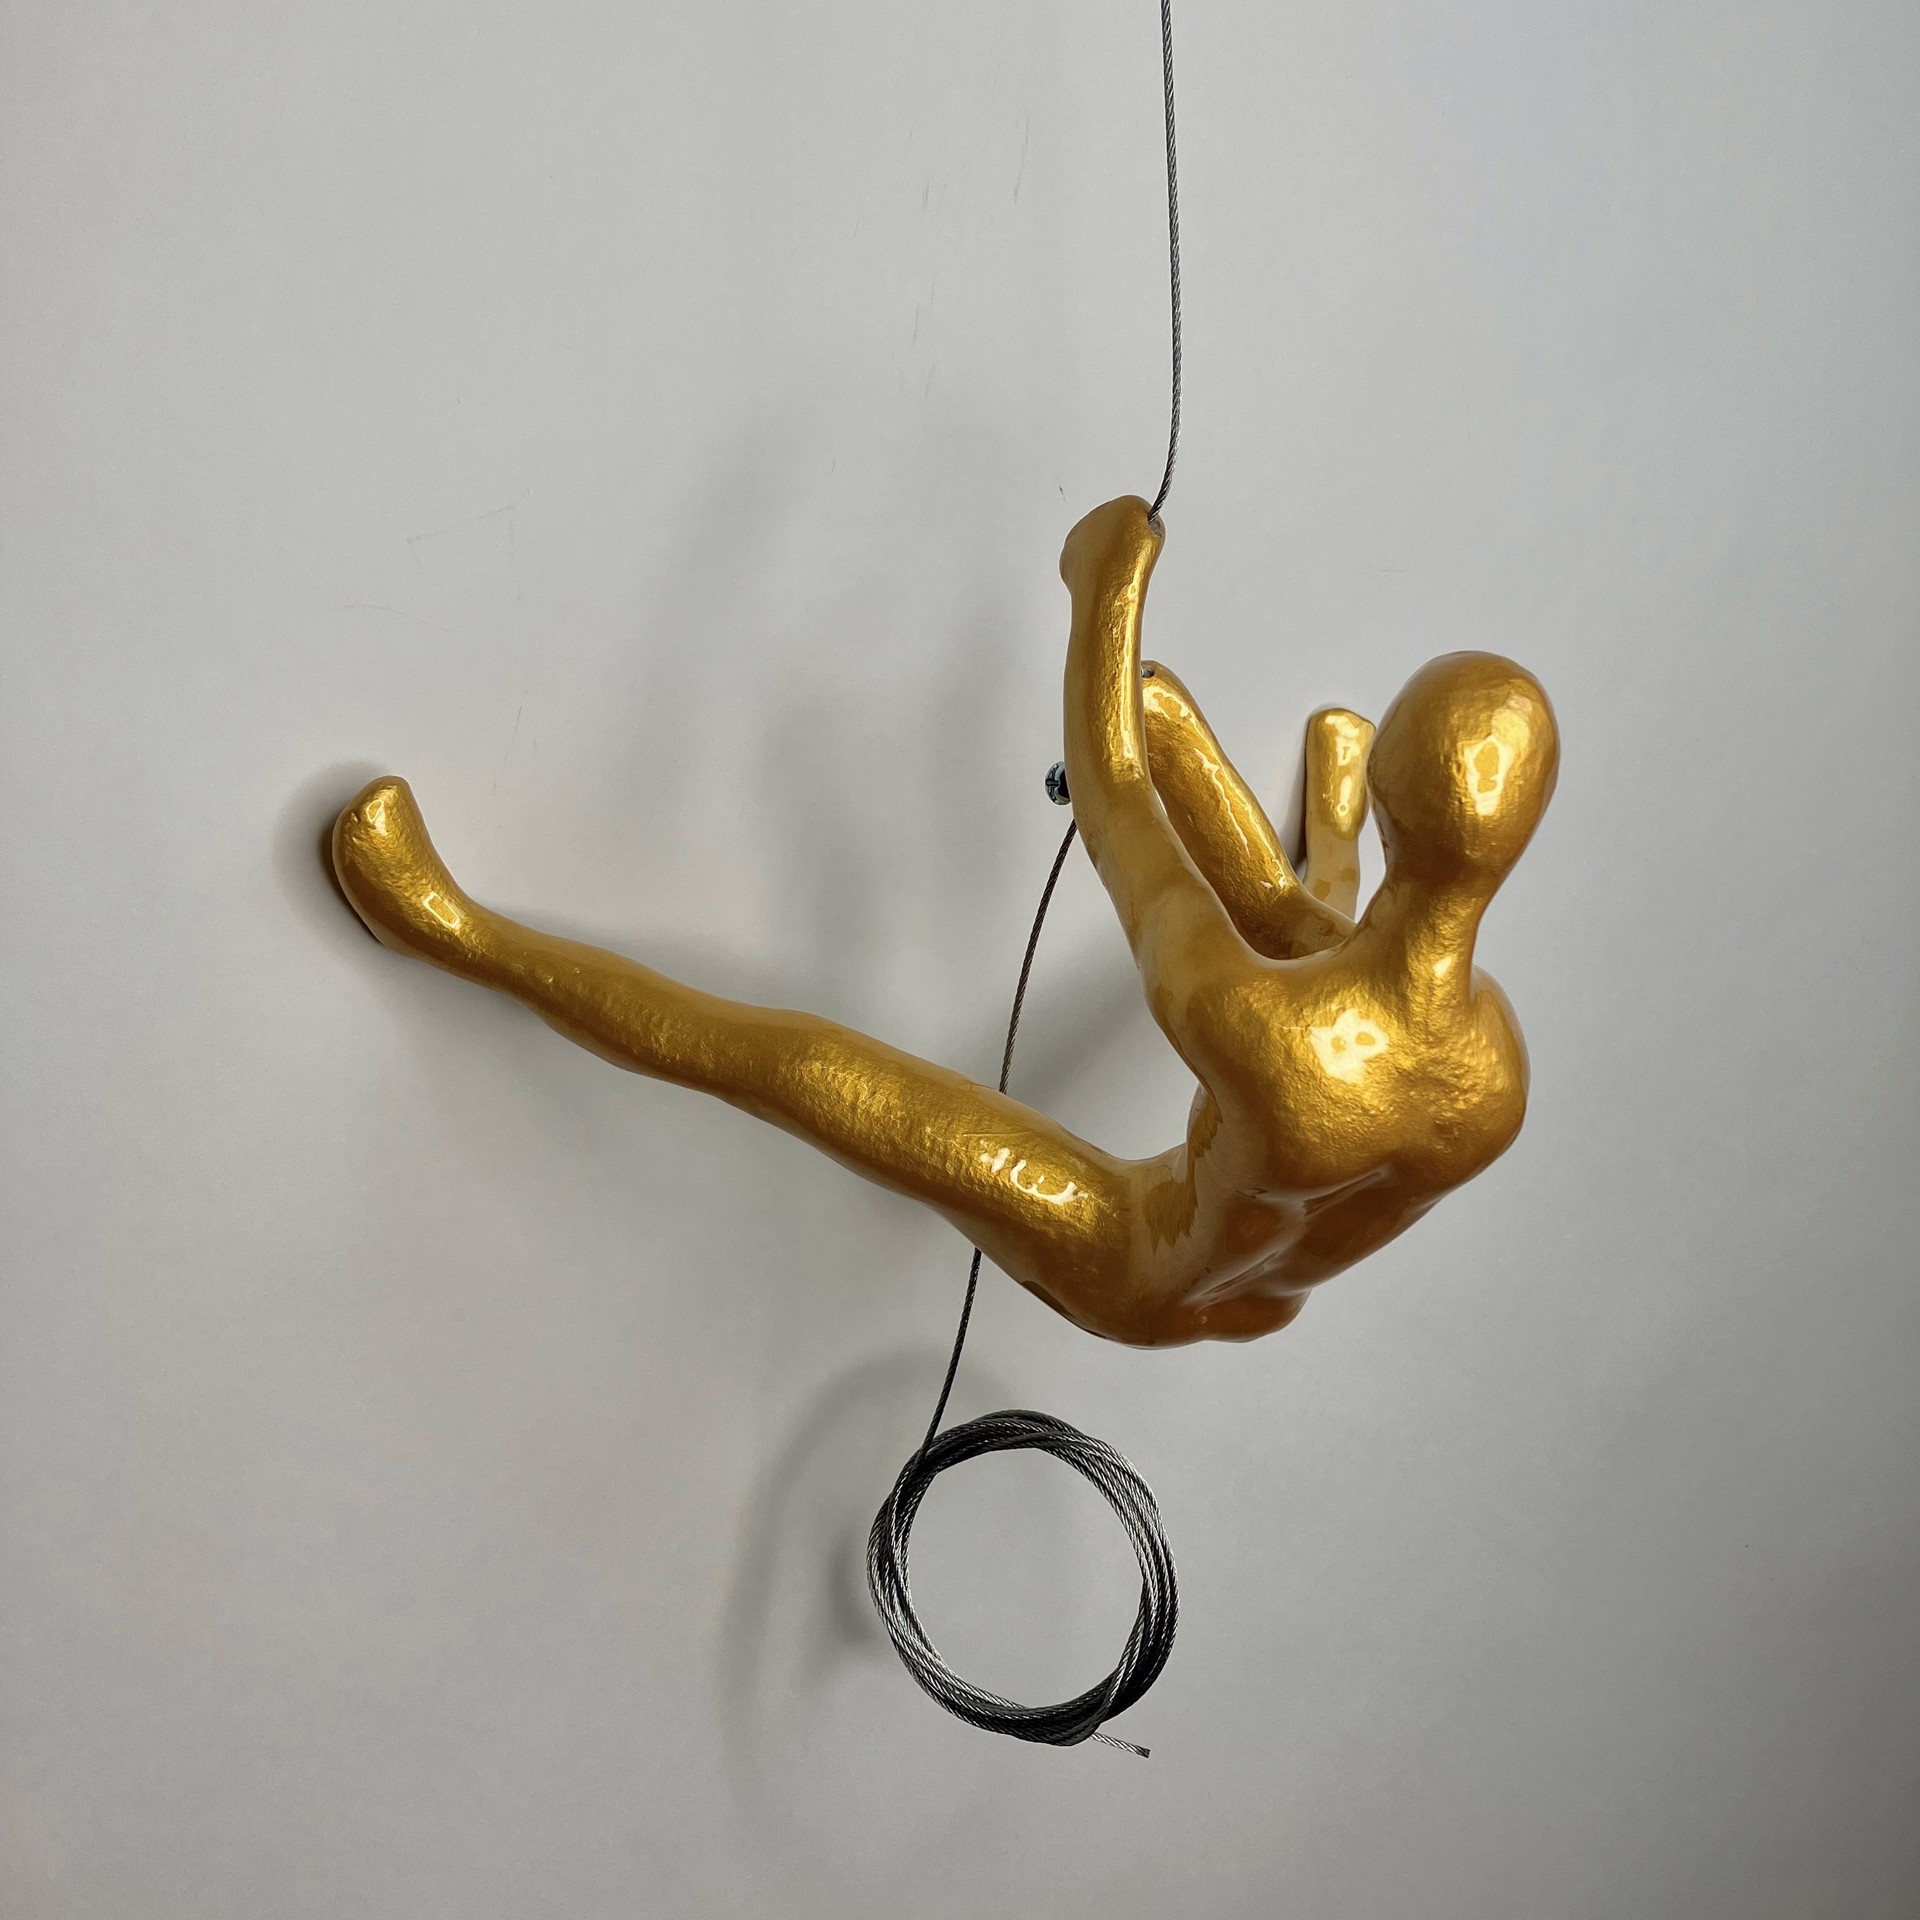 Male Climber 17-Q ~ Position 17 in color Gold by Ancizar Marin